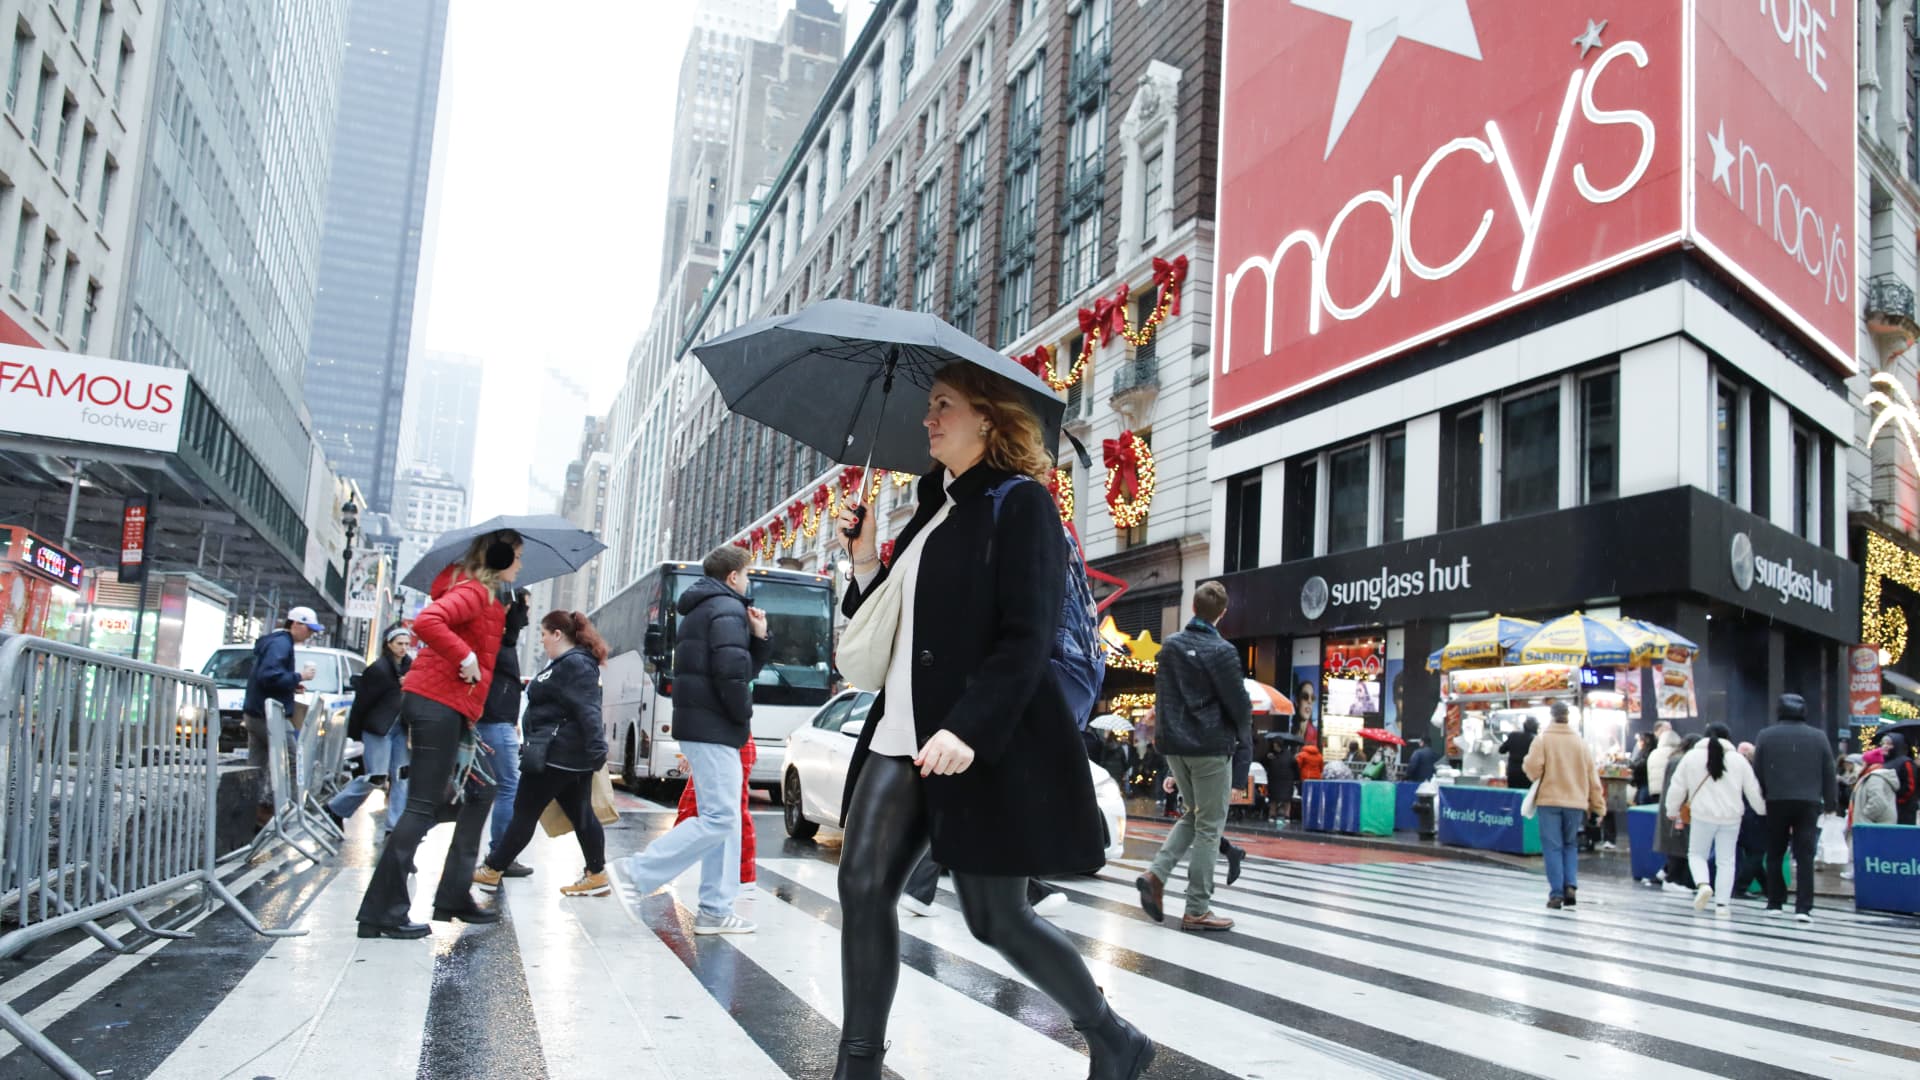 Store Closures Ahead: Macy’s Shutting Down Five Locations Amid Workforce Downsizing